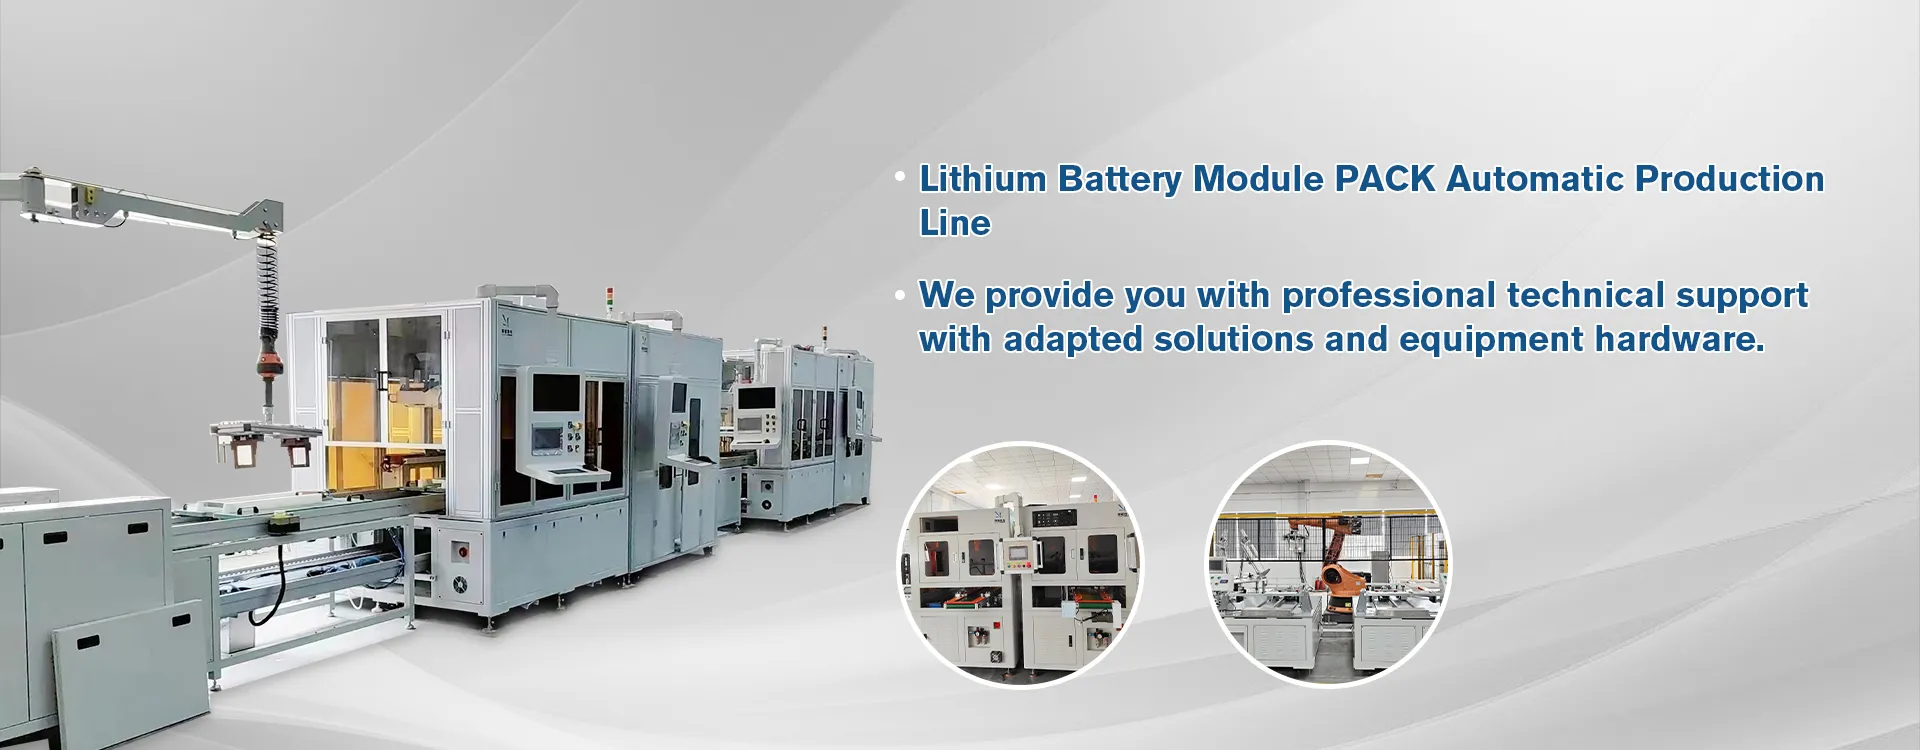 2022 Lithium battery module PACK assembly line